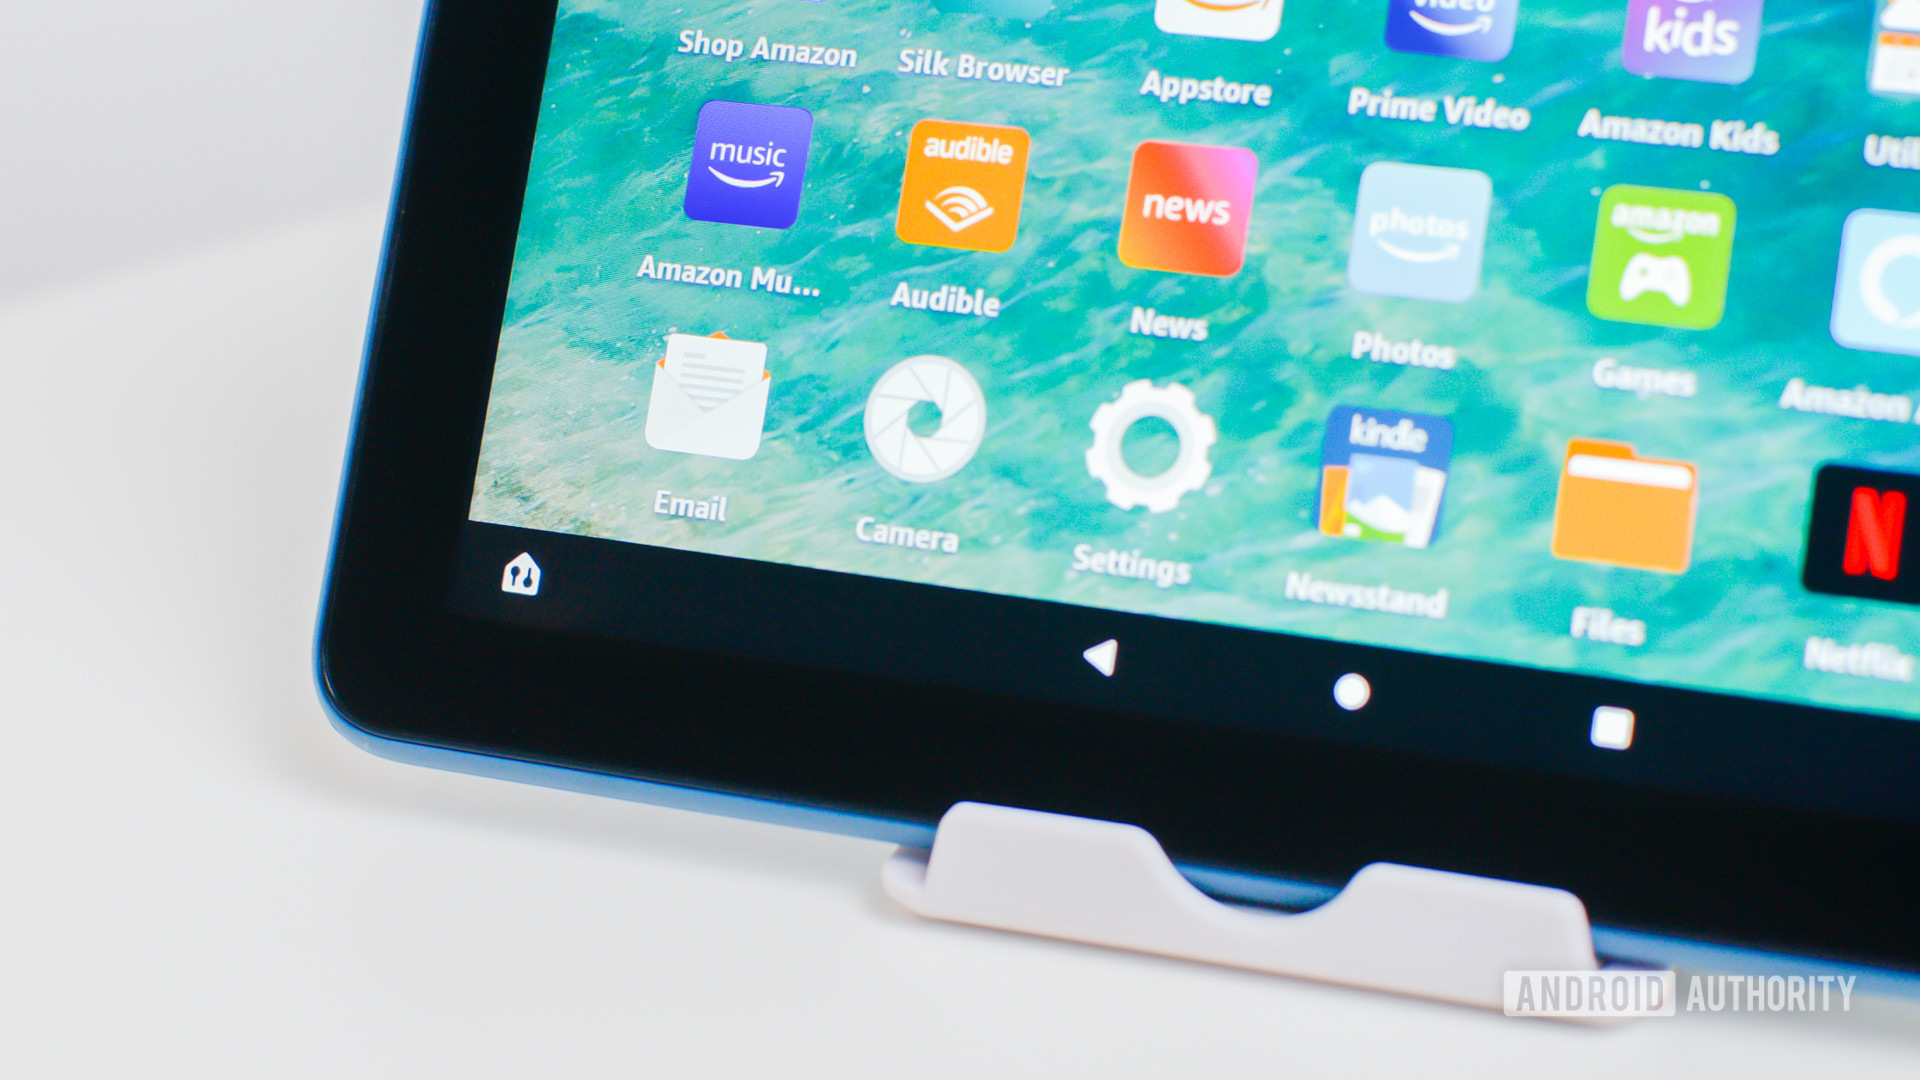 How to turn your Amazon Fire tablet into a smart home control hub